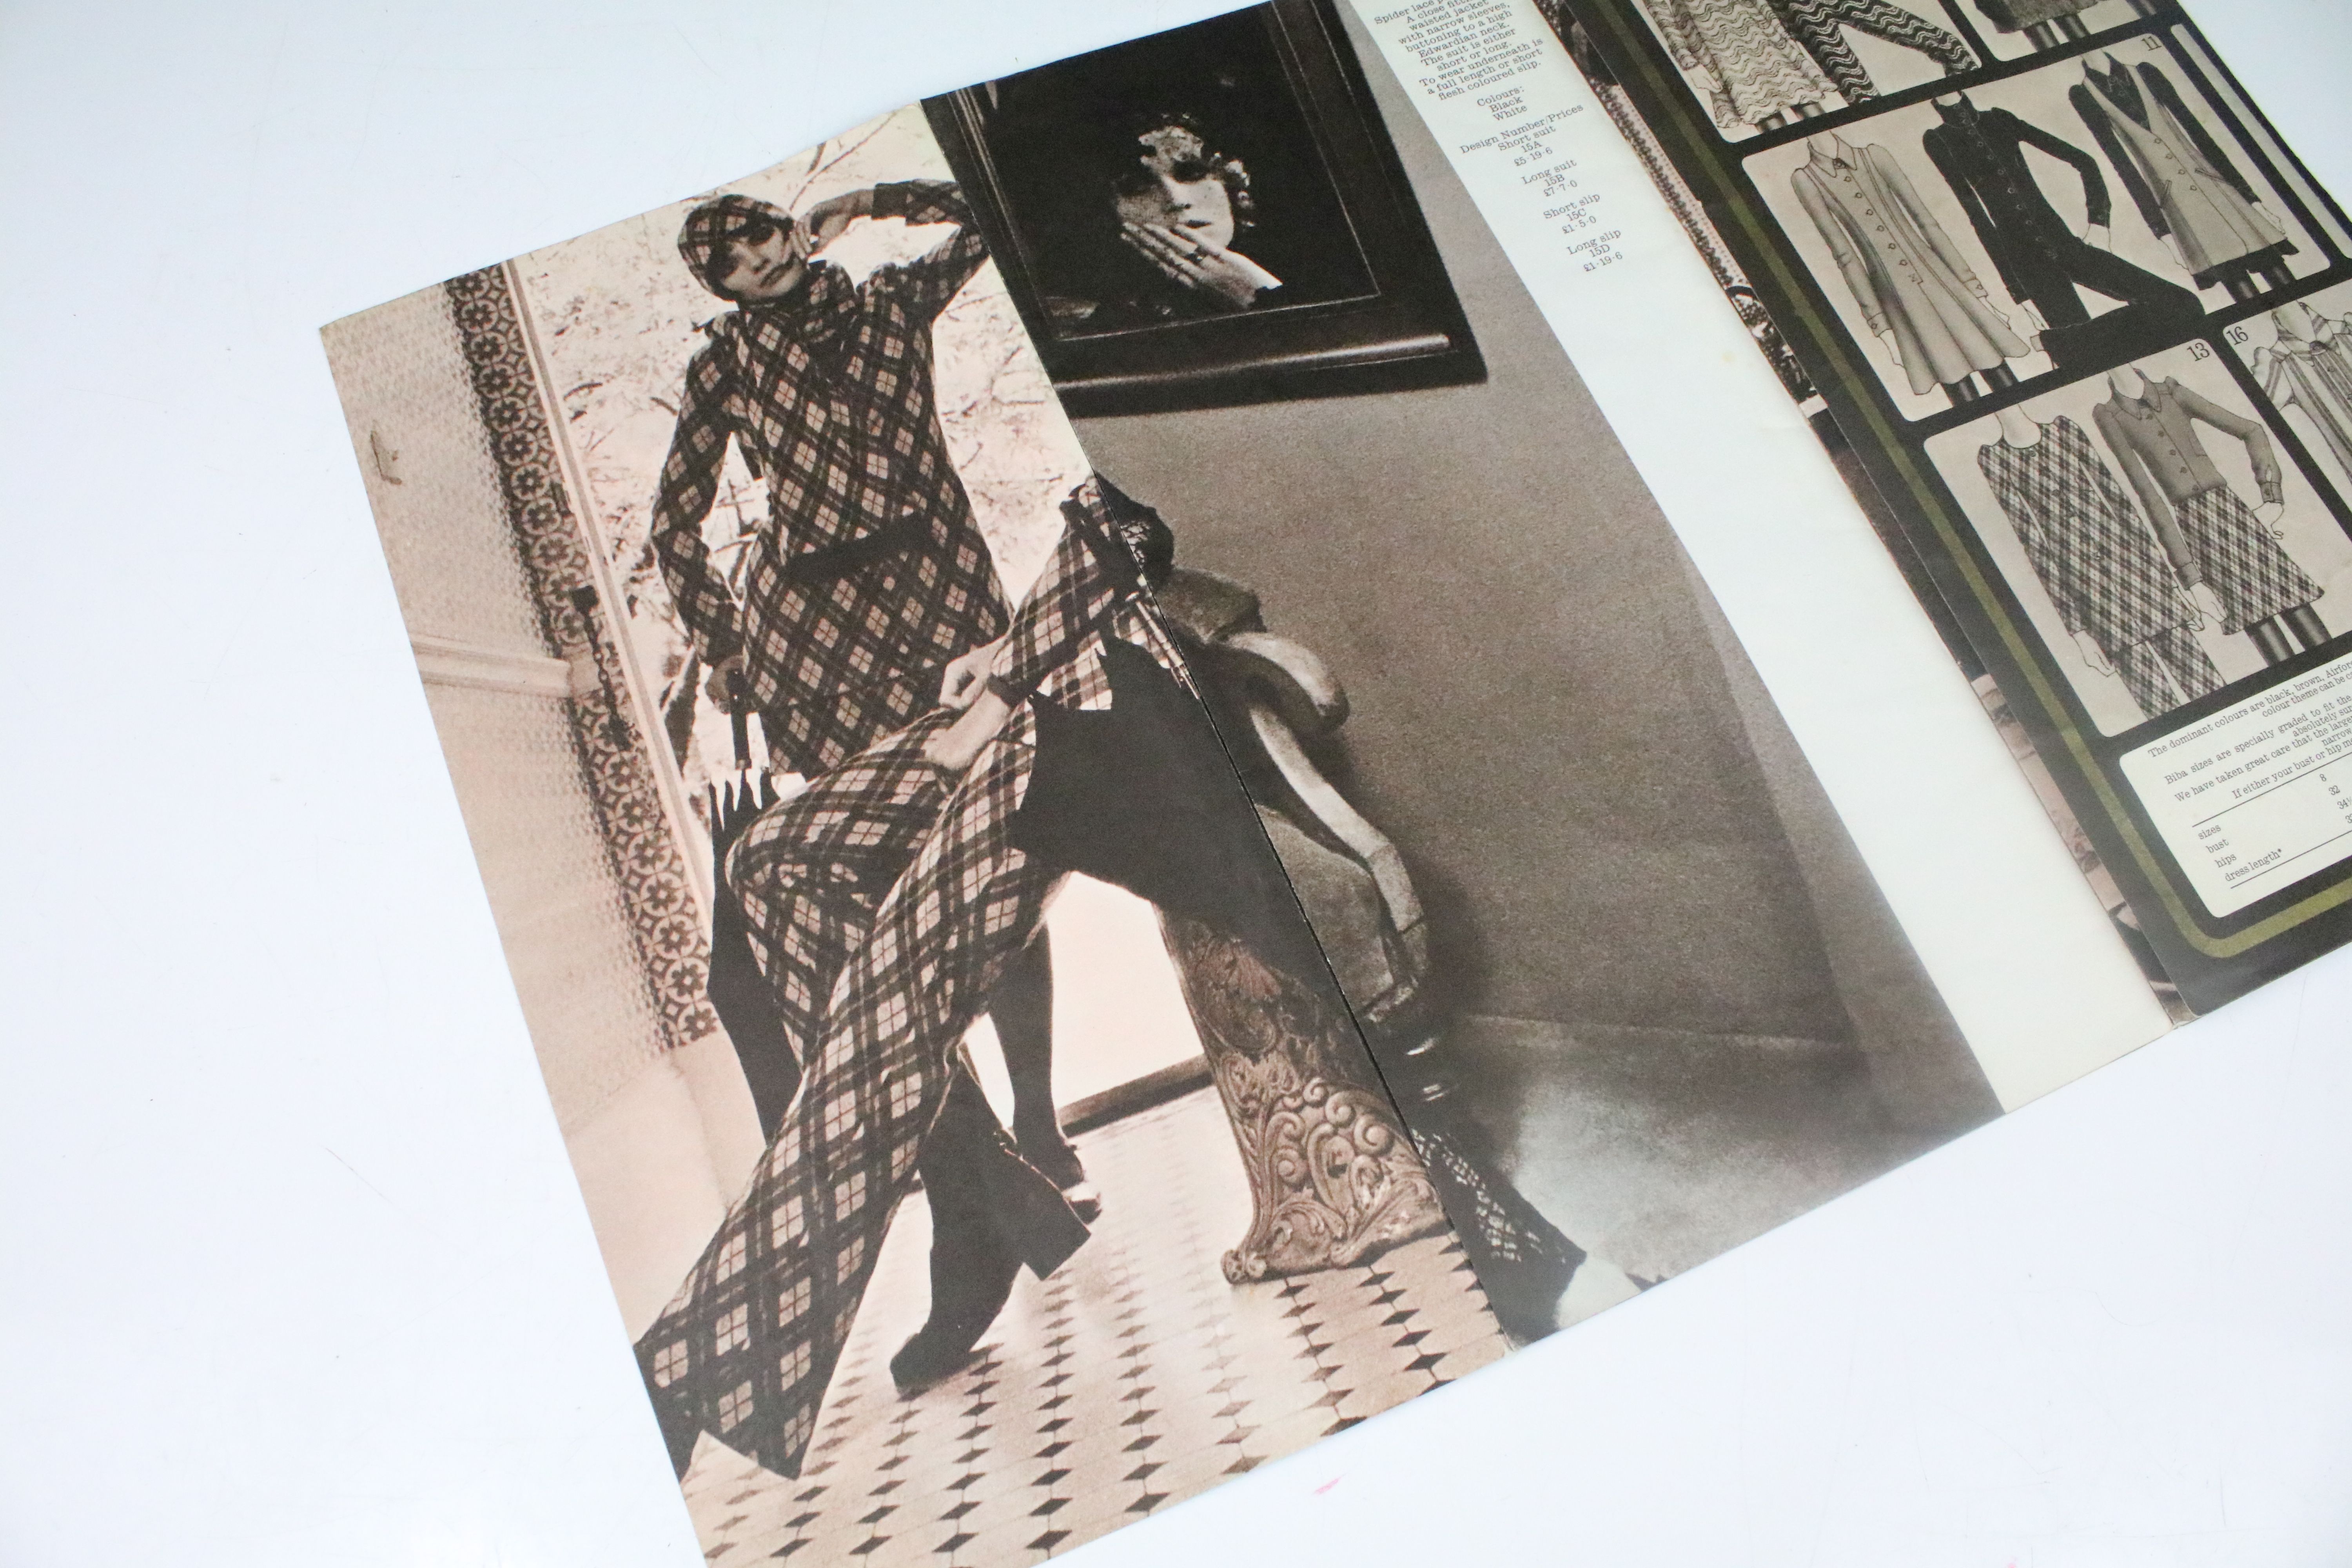 A vintage BIBA clothing catalogue with photography by Sarah Moon. - Image 3 of 3